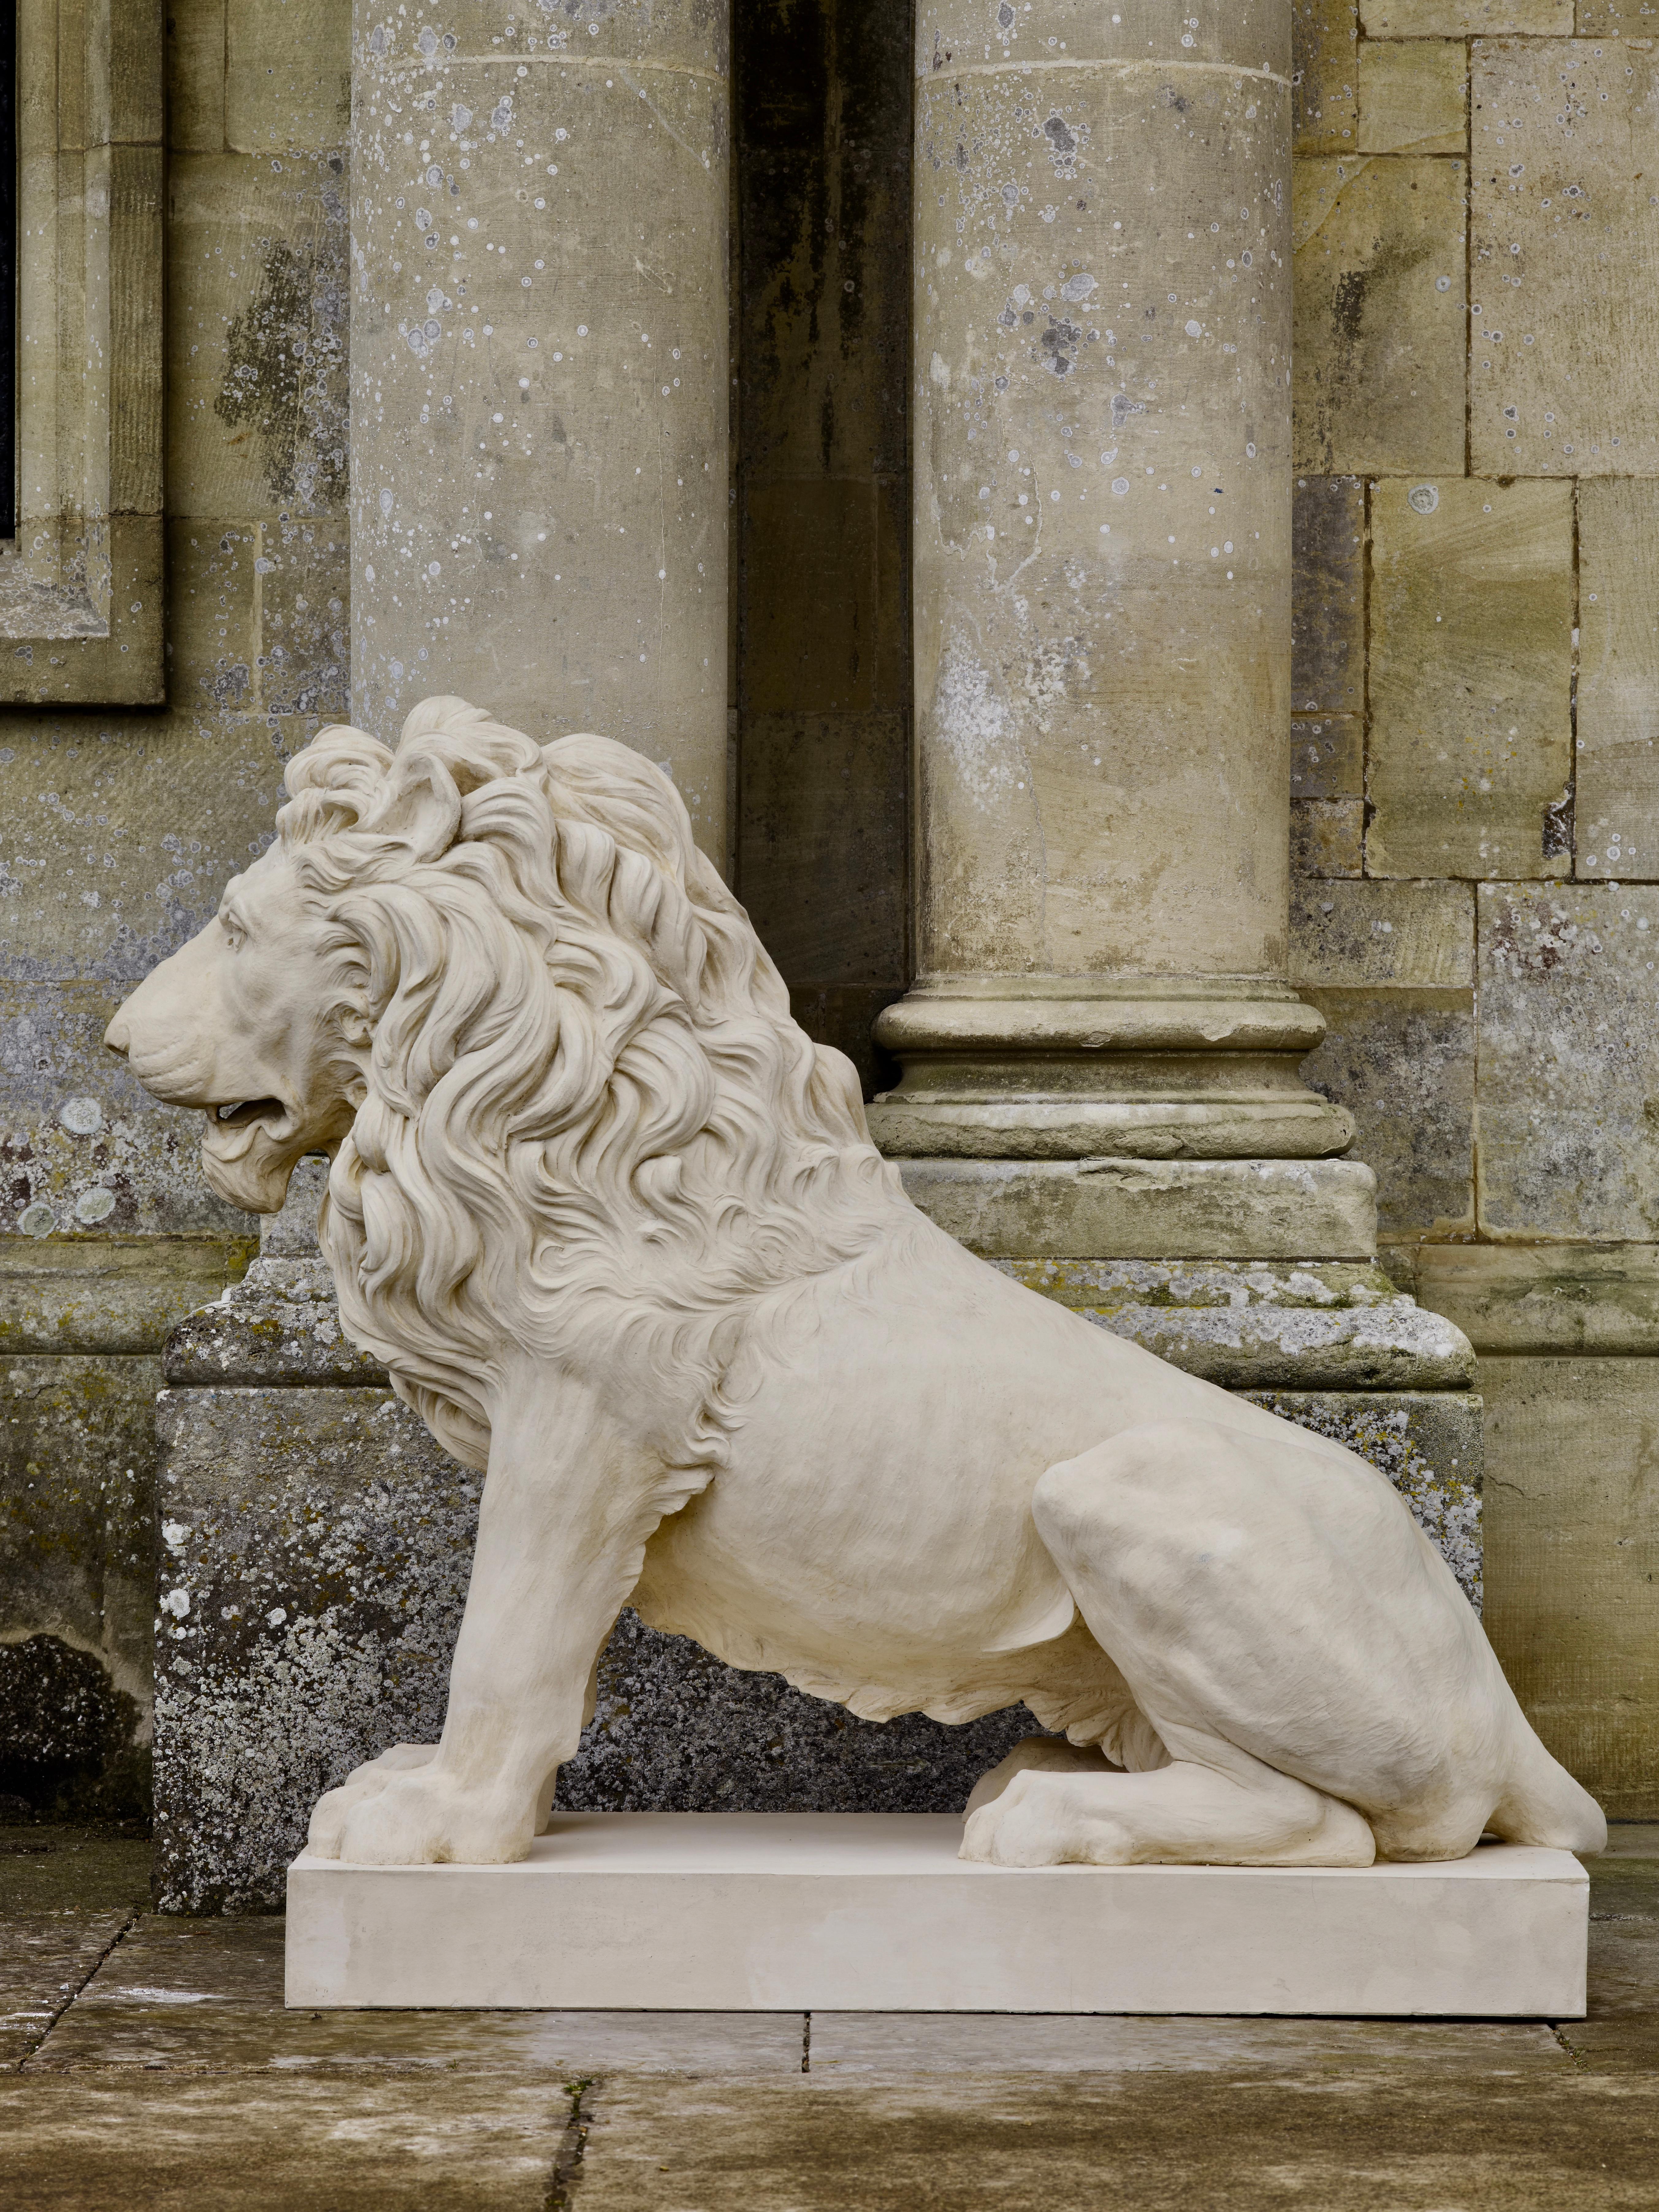 One of a selection of lions we make at Coade Studio.

This Coade Stone lion sejant, is one of a handed pair commissioned by an investment bank in Frankfurt, Germany to replace a missing pair. We were given antique photos of an indistinct nature to